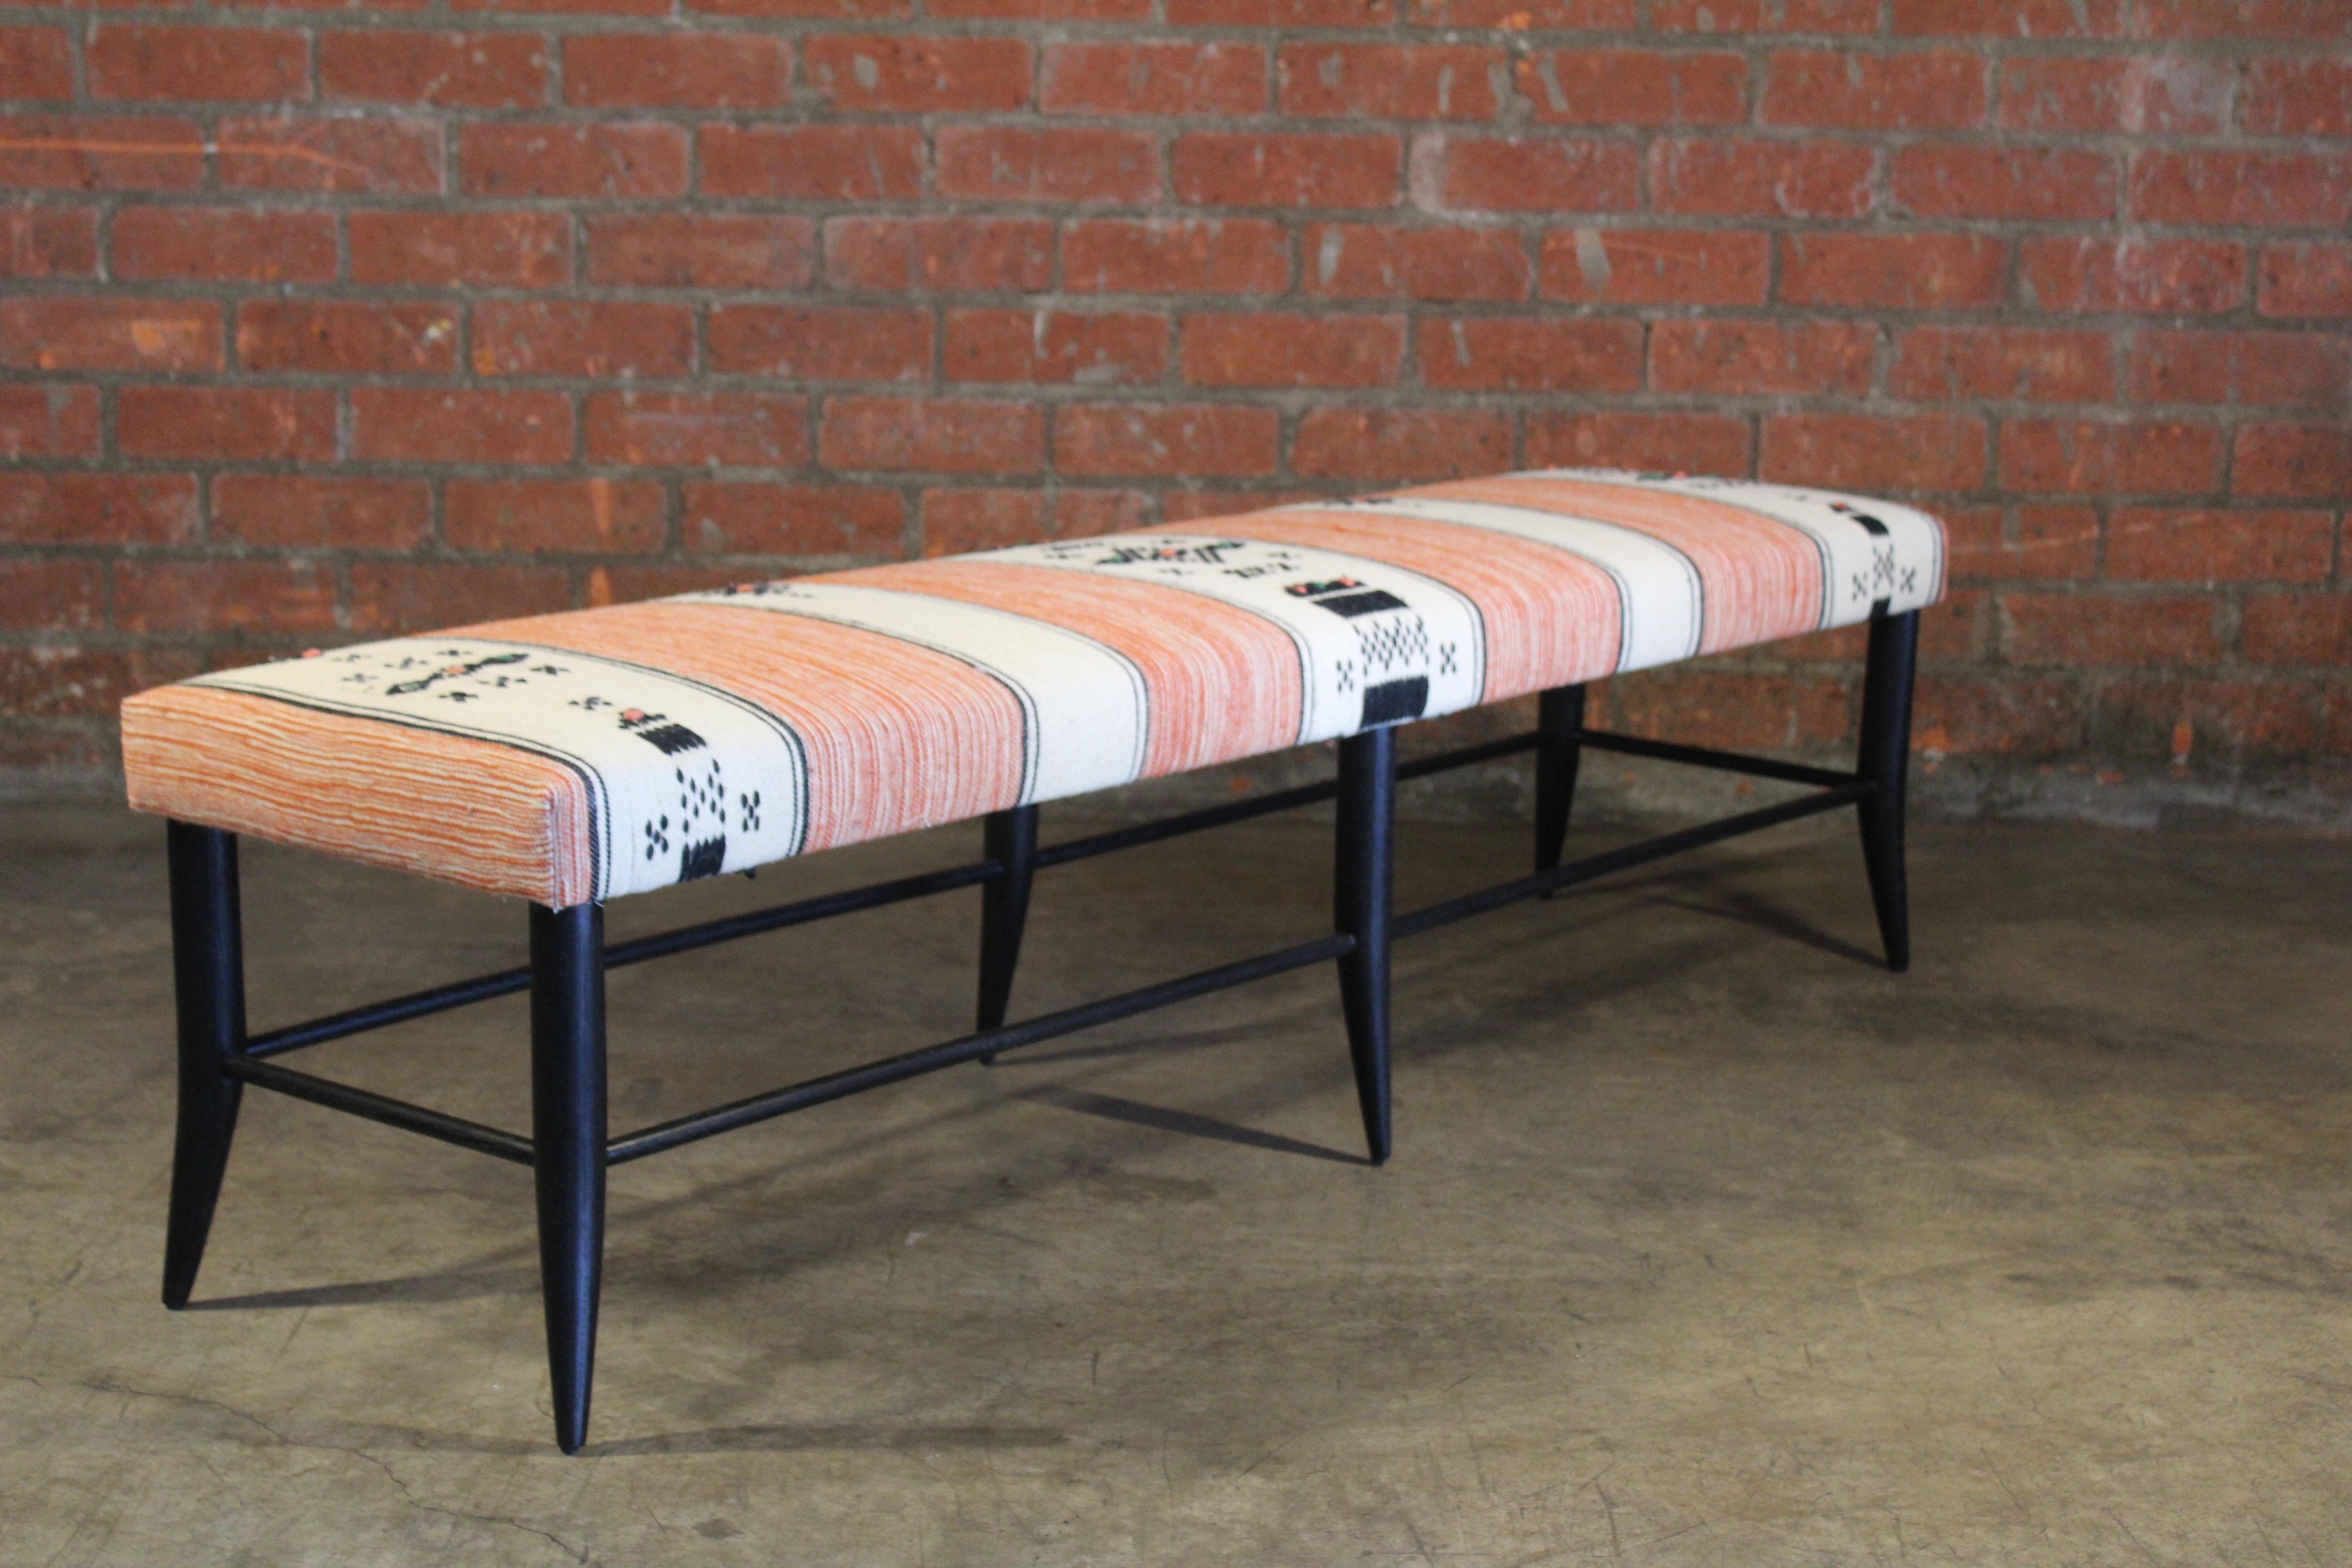 Oak Bench Upholstered in a Vintage 1970s Moroccan Wool Textile 3